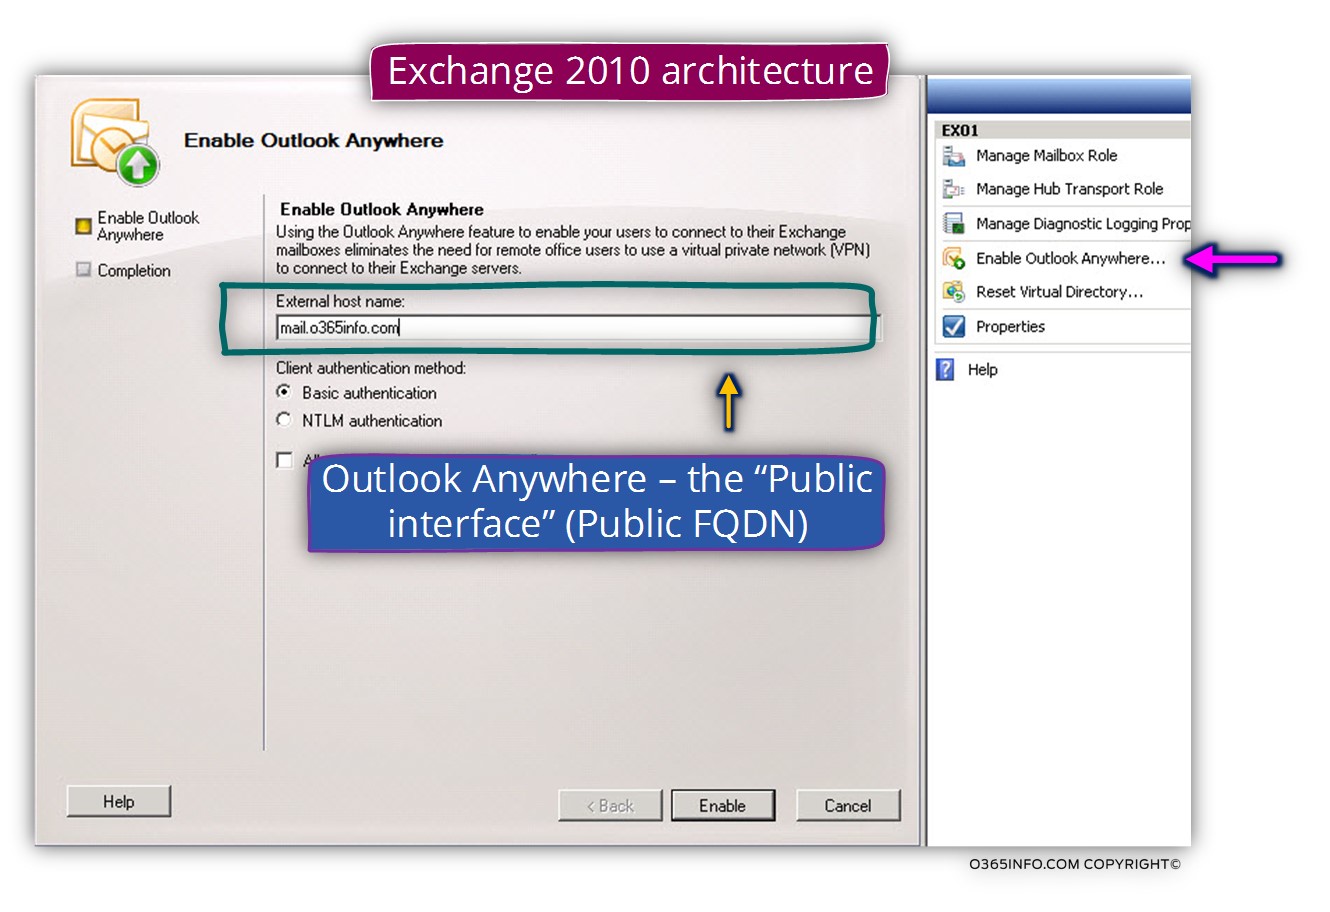 Exchange 2010 GUI interface for managing Outlook Anywhere RPC over HTTPS services